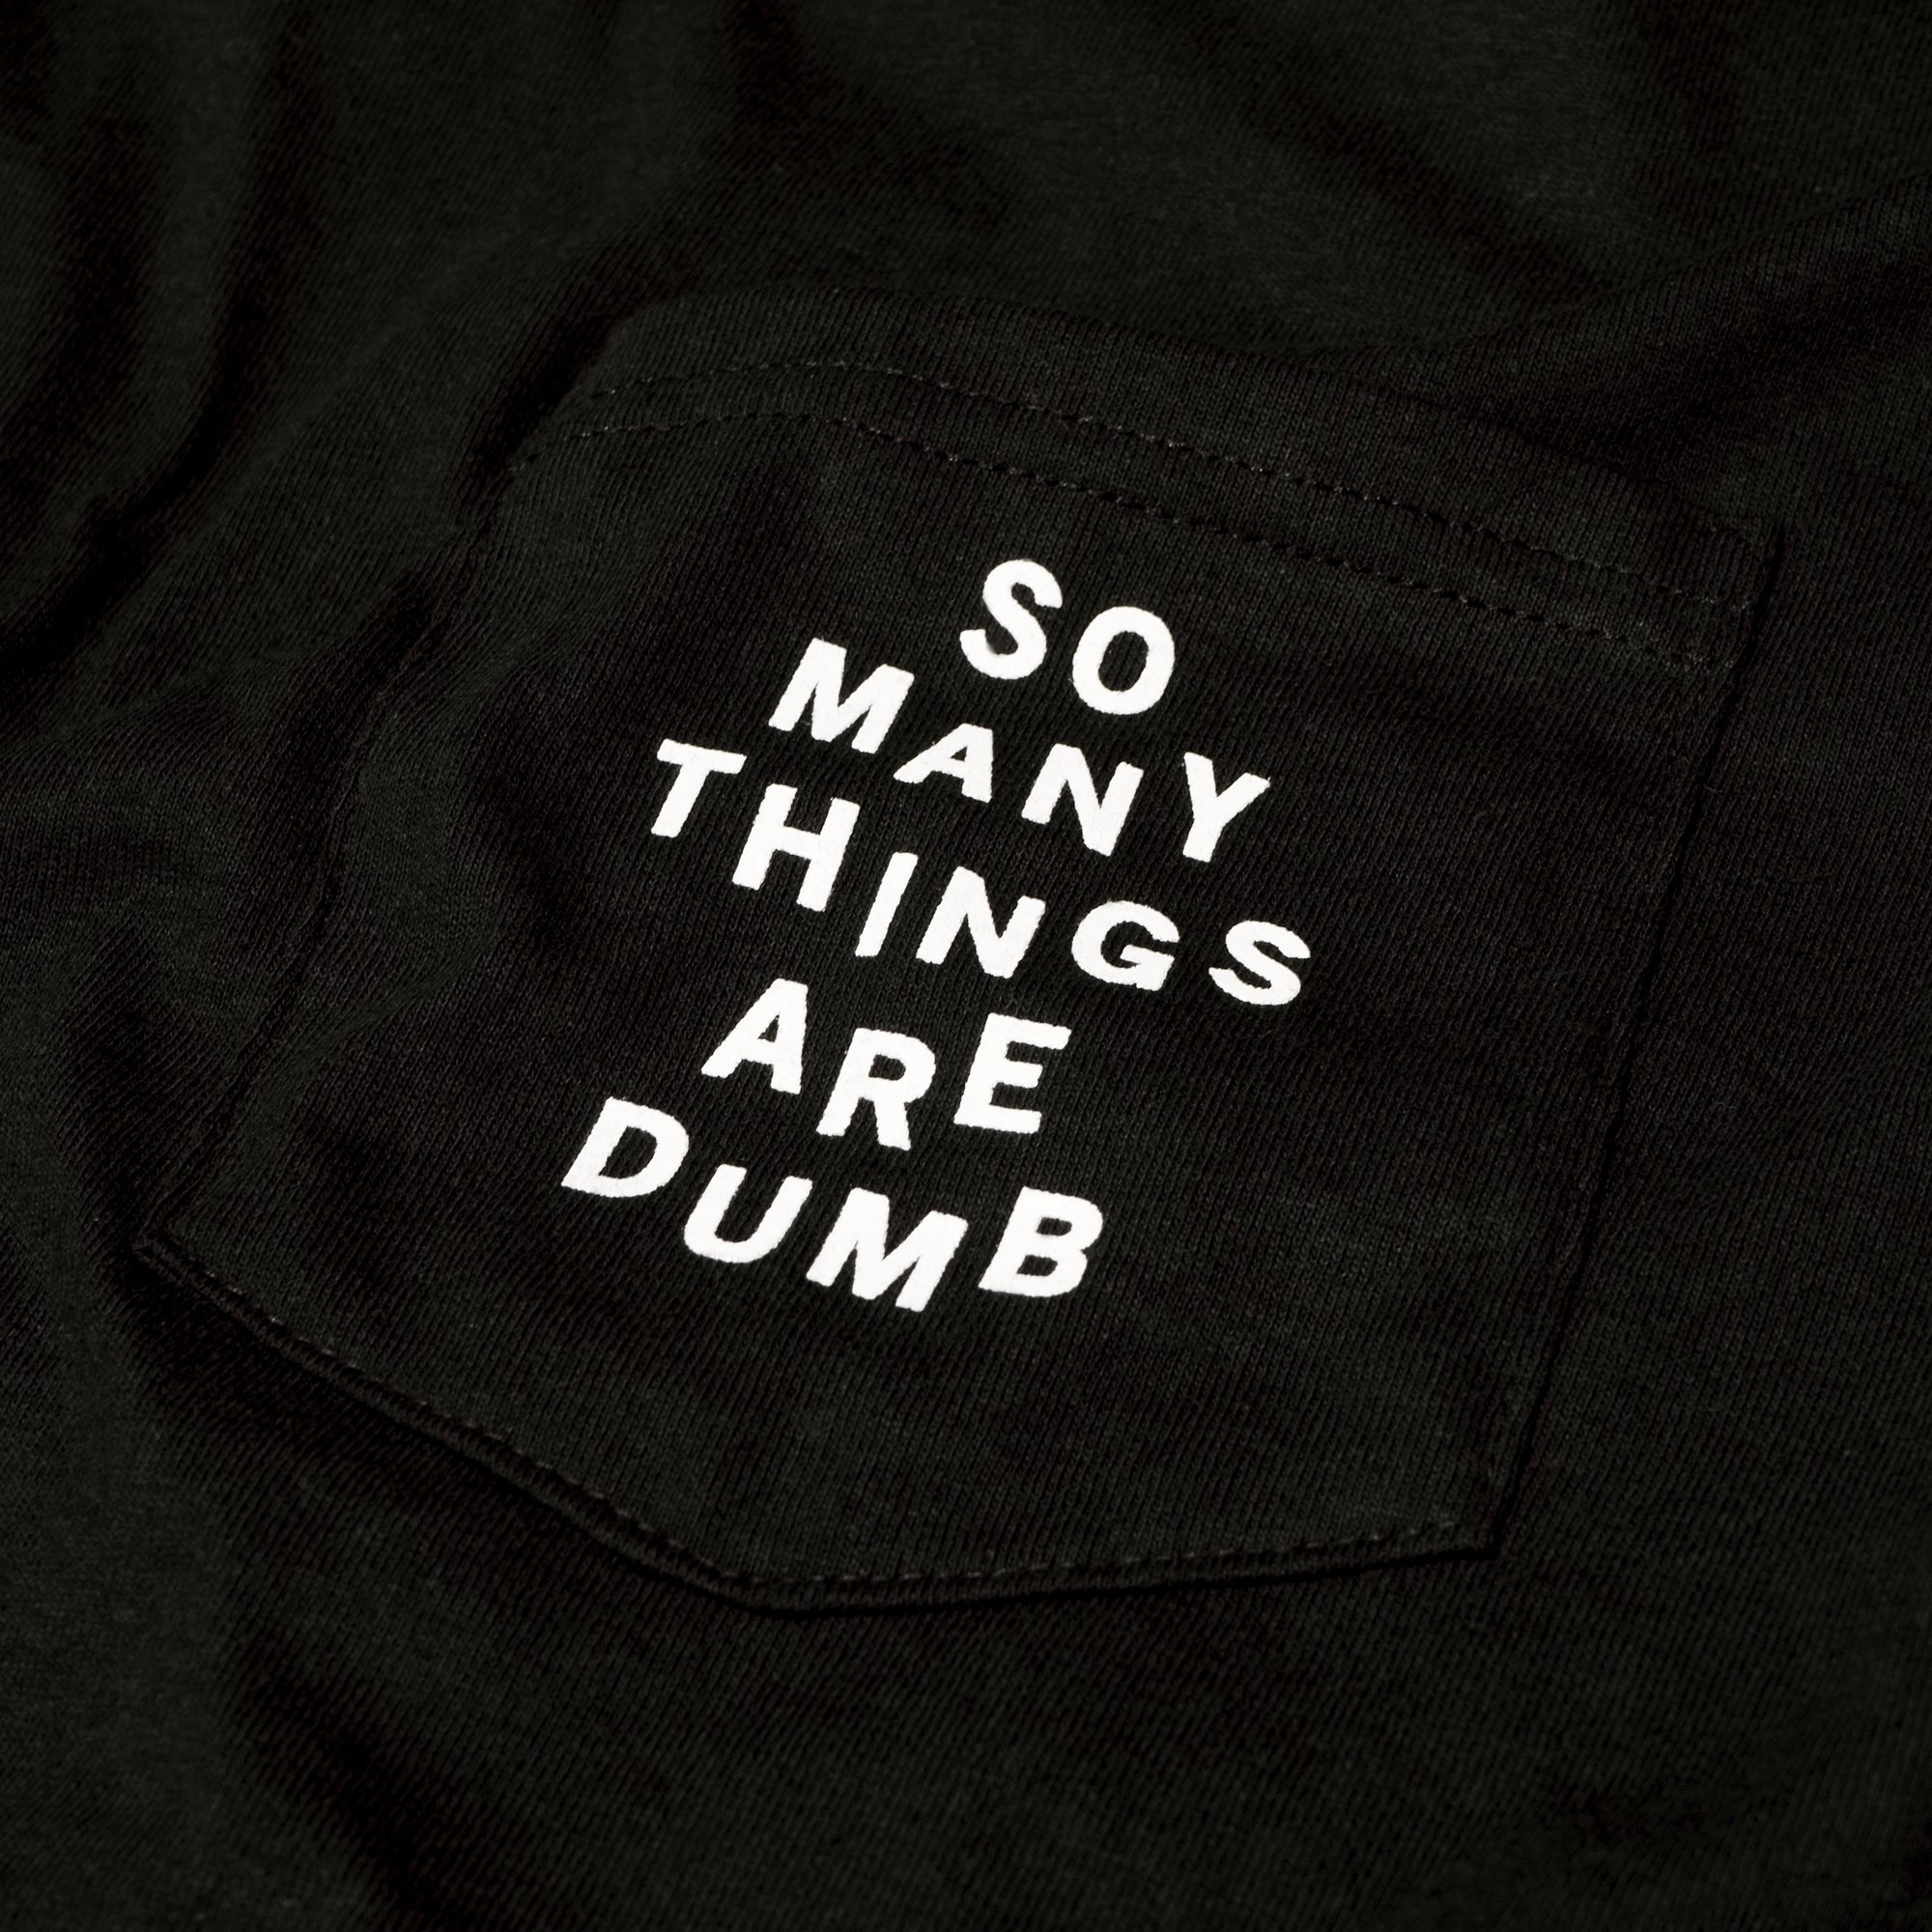 Detail of the original NO FUN® "So many things are dumb" pocket tee.  This closeup image showcases the front pocket detail, and the white text that reads "So Many Things Are Dumb".